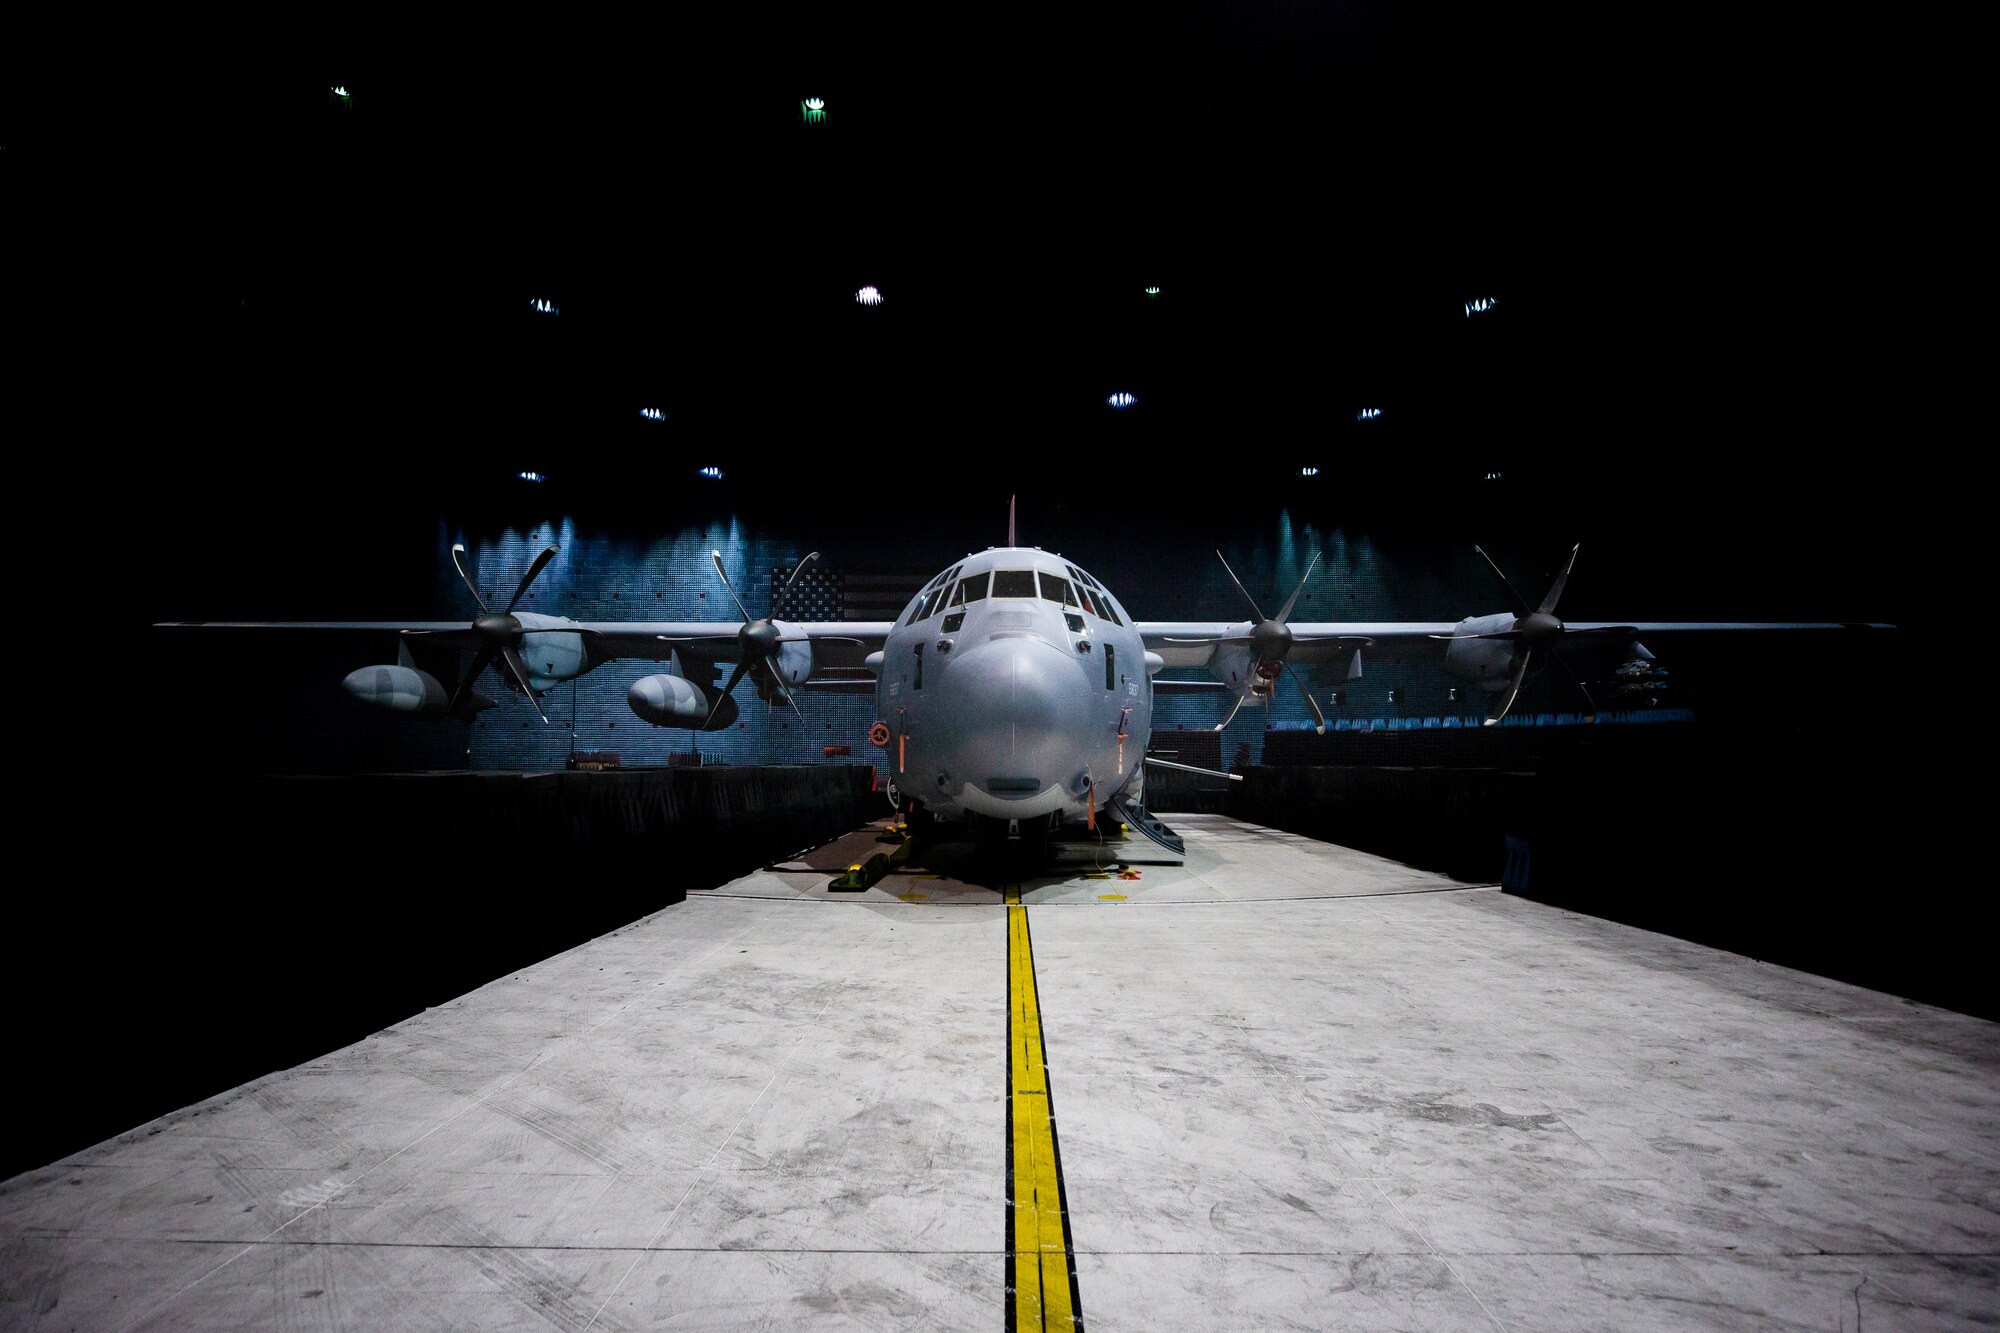 An AC-130J Ghostrider assigned to the 1st Special Operations Wing from Hurlburt Field, Fla., is loaded into the Benefiled Anechoic Facility on Edwards Air Force Base, California, March 17. The aircraft recently underwent electronic weapons countermeasures testing at the BAF. (Air Force photo by Kaitlyn Steigerwald)